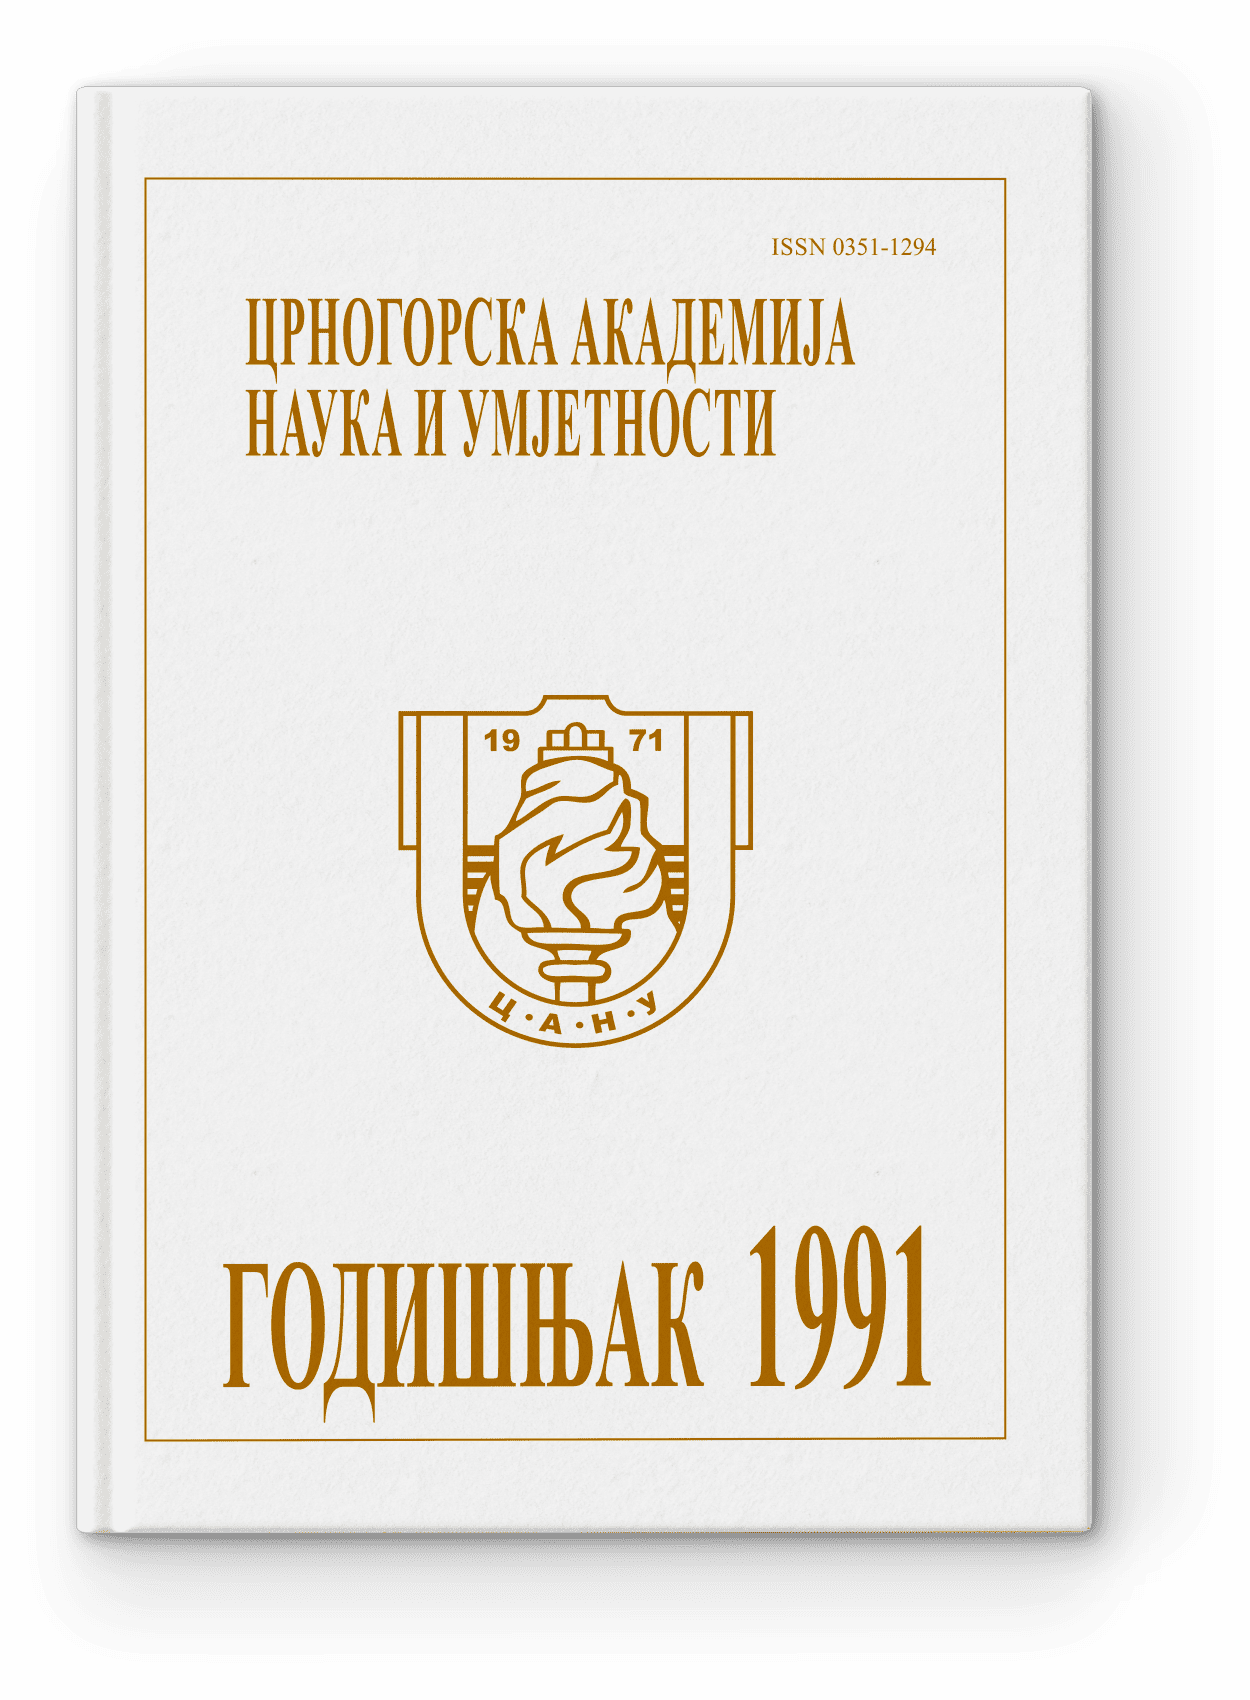 Yearbook 1991